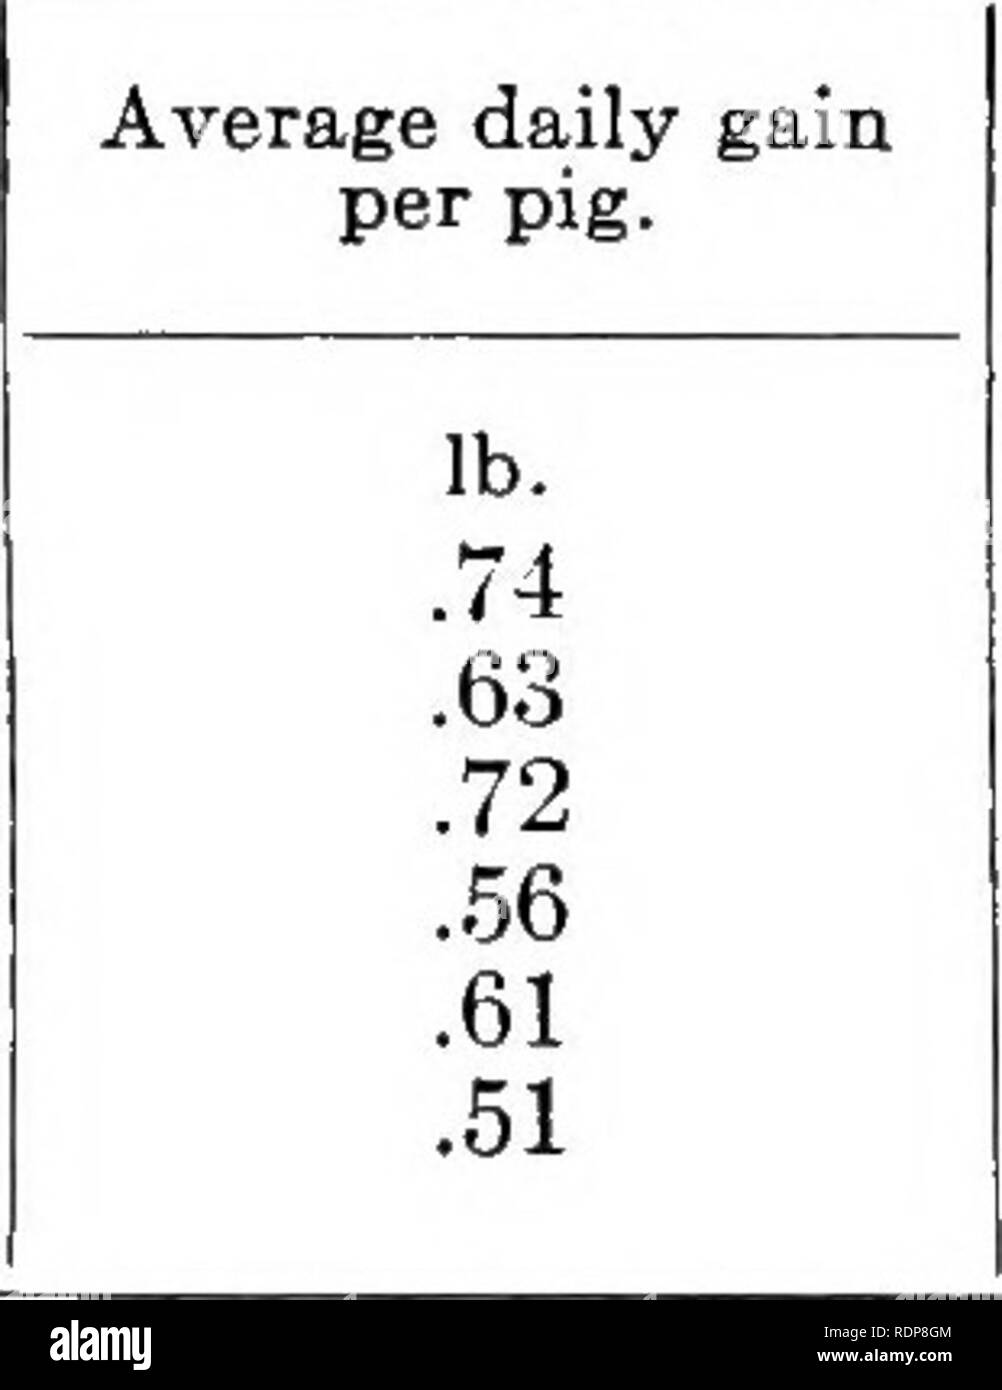 . Productive swine husbandry. Swine. 174 RESULTS OF EXPERIMENTS IN SWINE FEEDING Four tests were also made with, hominy feed and tankage compared with corn meal and tankage, mixed in the proportion of 20 parts hominy feed or com meal to 1 part of tankage. The average of the four tests shows the following: Average daily gain per head Meal consumed per 100 pounds gain. Hominy feed Corn meal and tankage. and tankage. 1.4 pounds 1.2 pounds 372 pounds 4.31 pounds The results are summarized as follows: '' Hominy feed produces more rapid growth on hogs than does com meal.&quot; &quot; Hominy feed pro Stock Photo